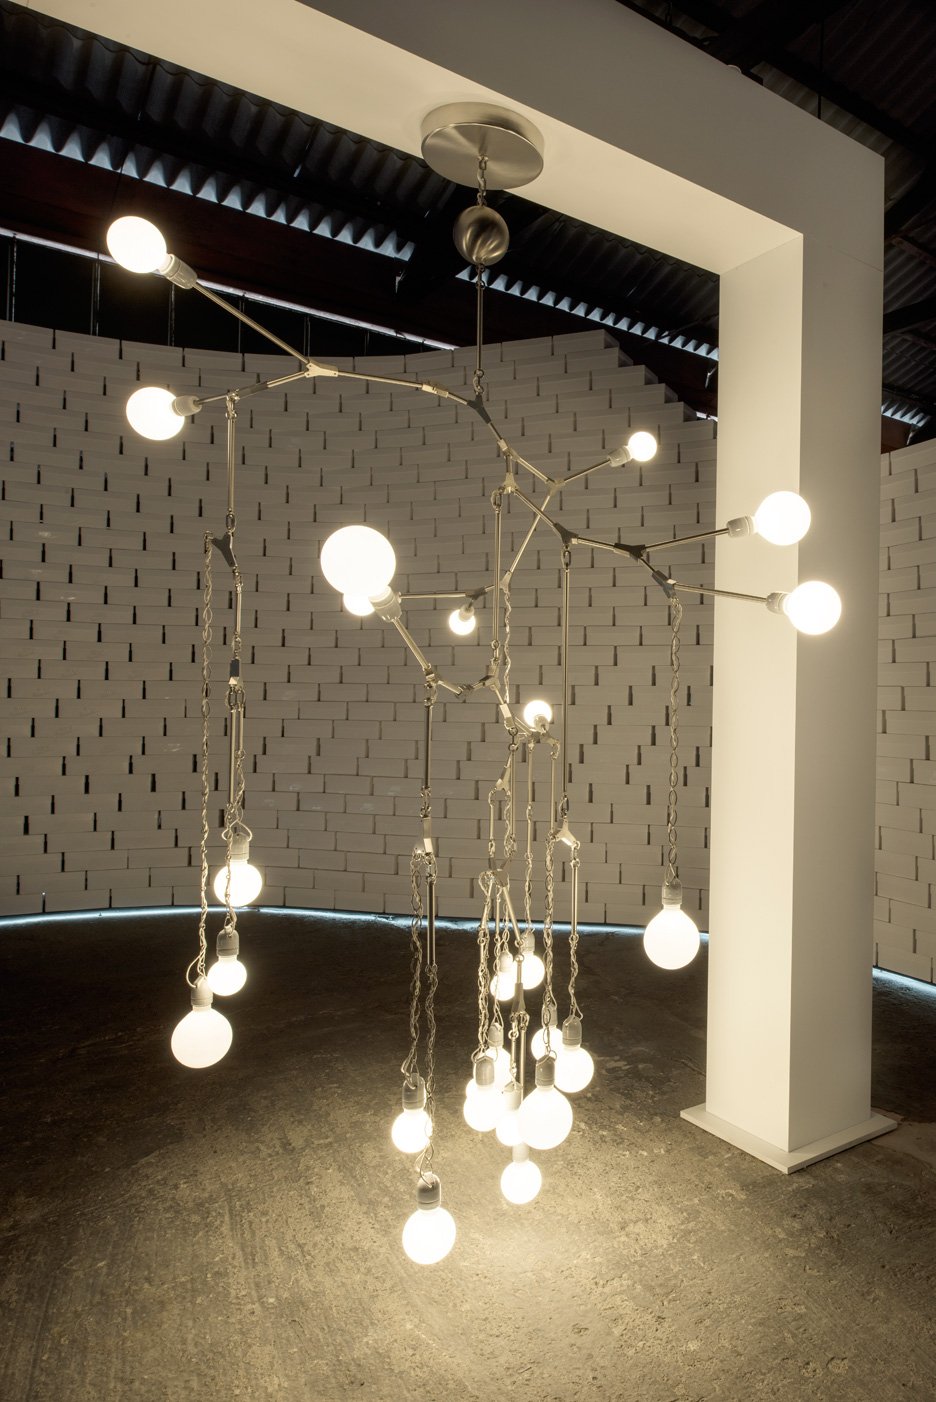 Lighting installation by Lindsey Adelman at Nike's The Nature of Motion exhibition in Milan